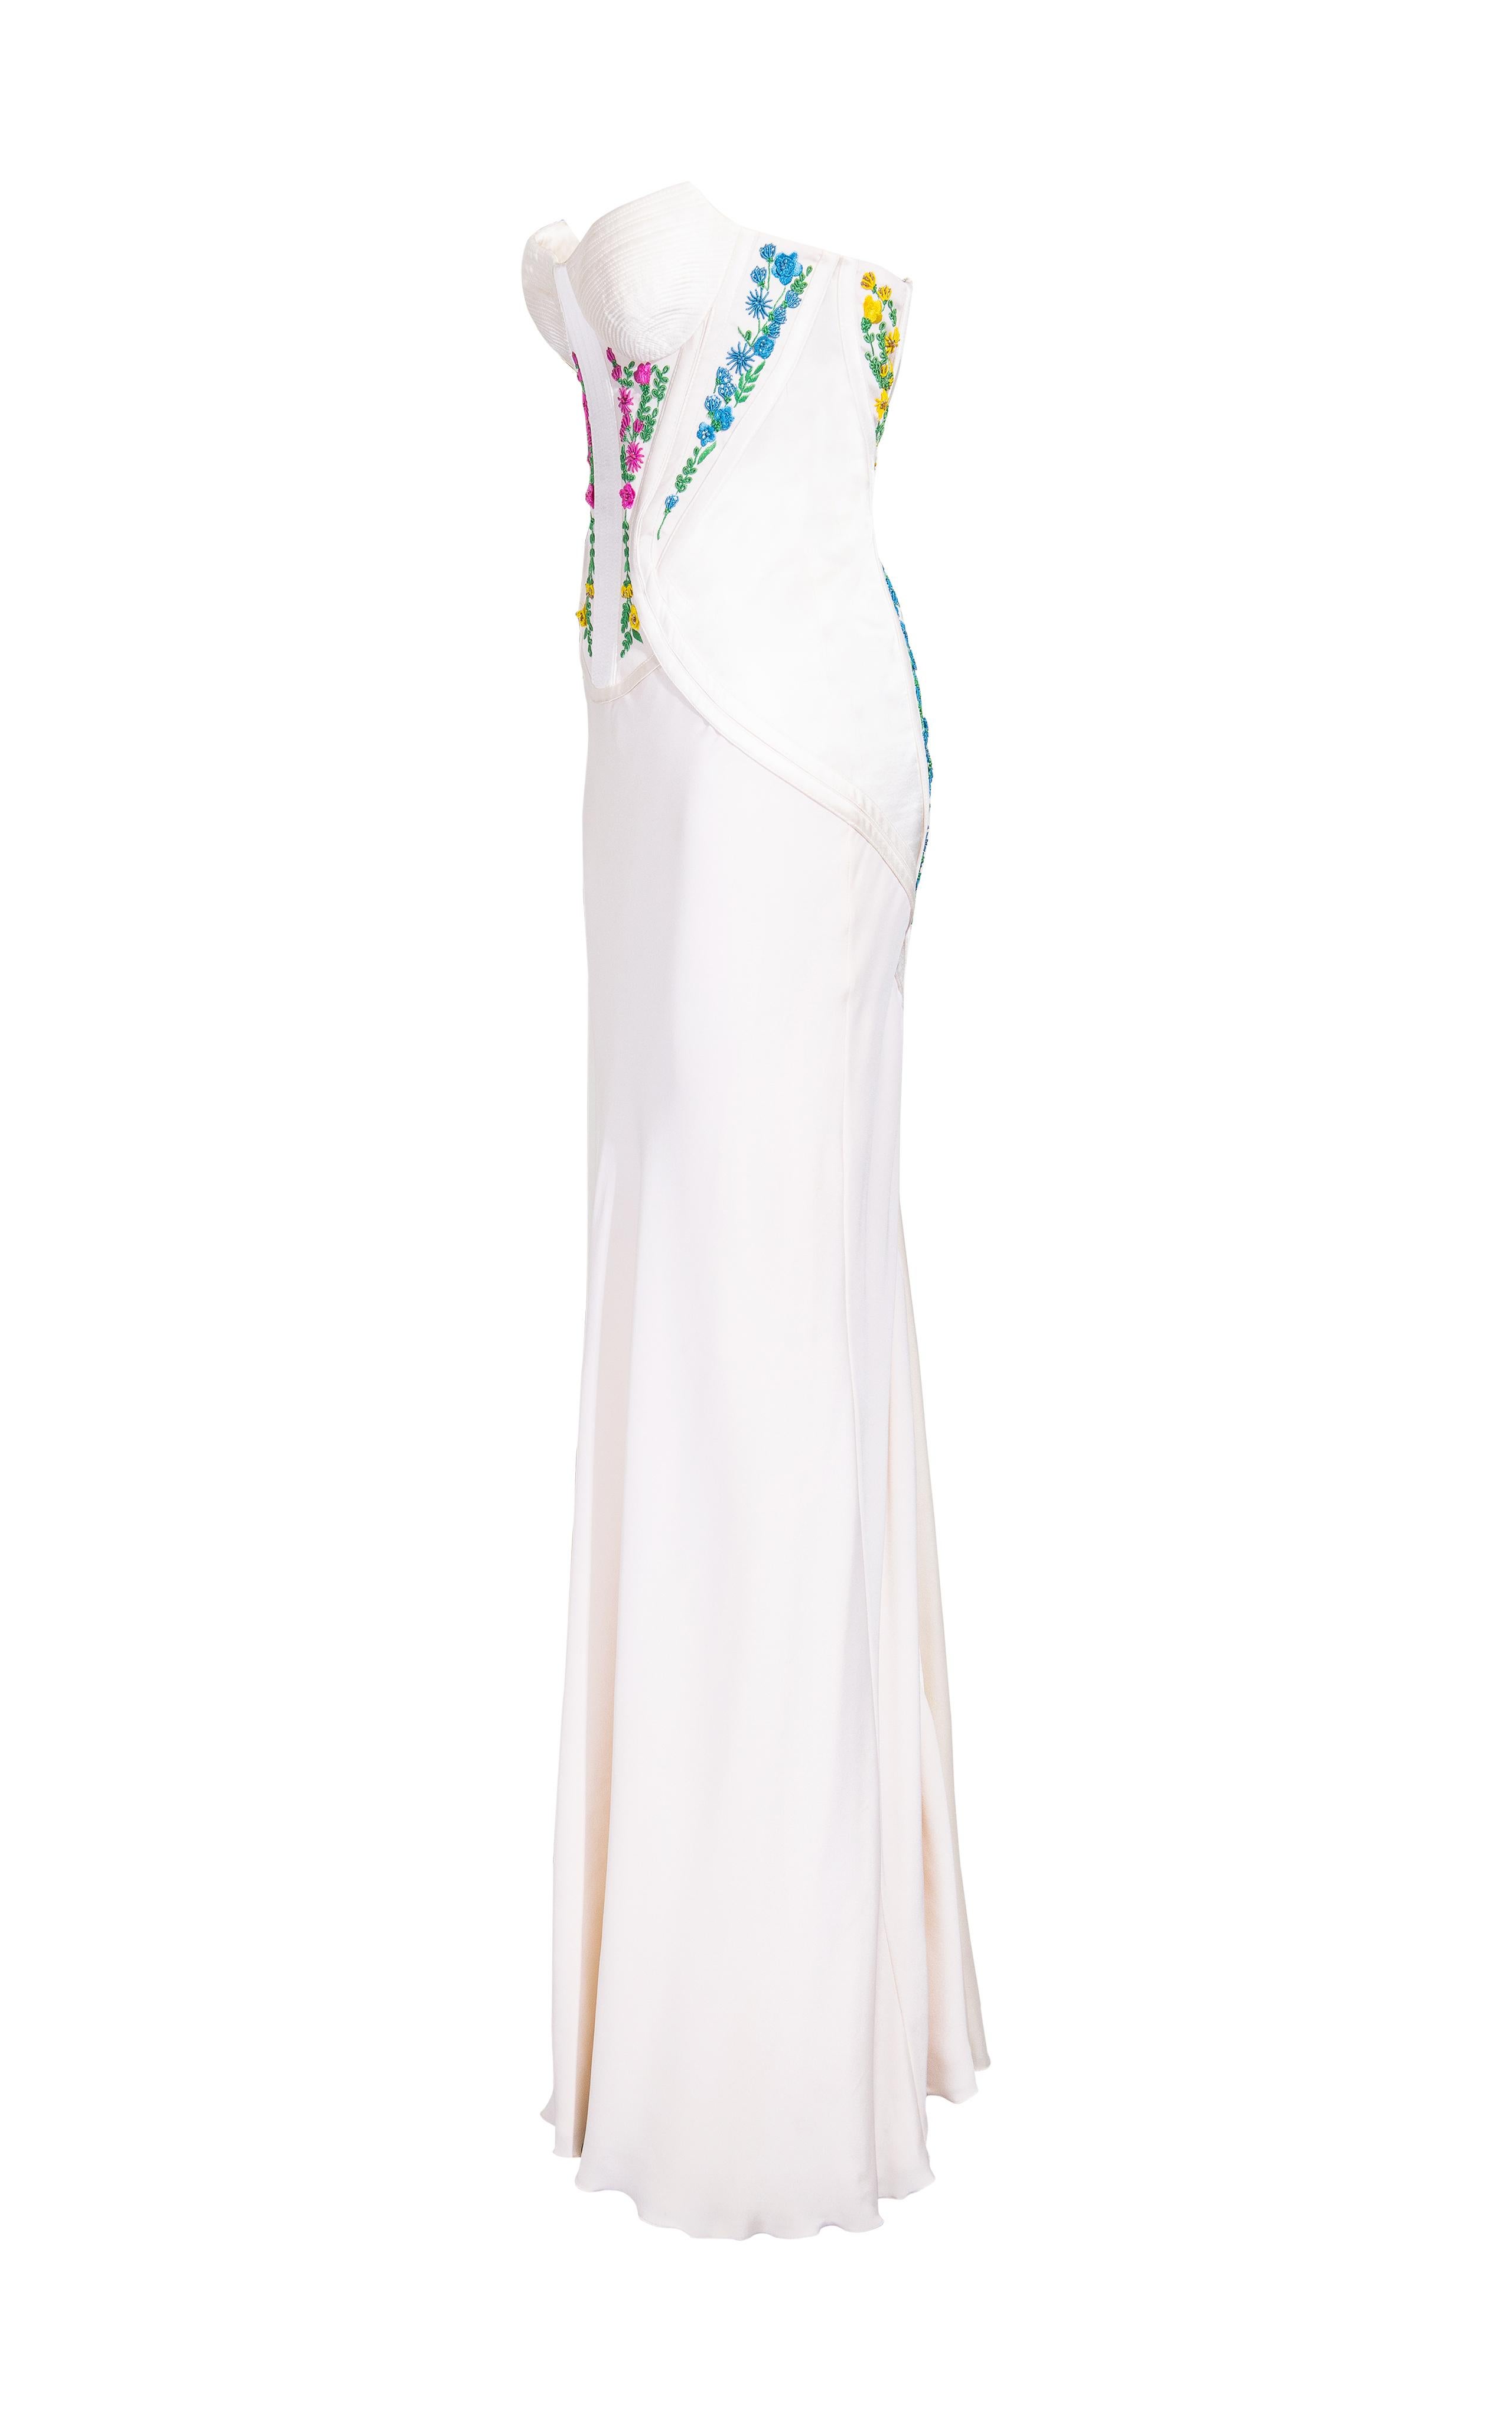 Atelier Versace white gown with colorful floral embroidery; a re-issue of S/S 1995 Gianni Versace design. Built-in corset with boning and curved paneling across hips creates beautiful shape across the body. New with original tags and original